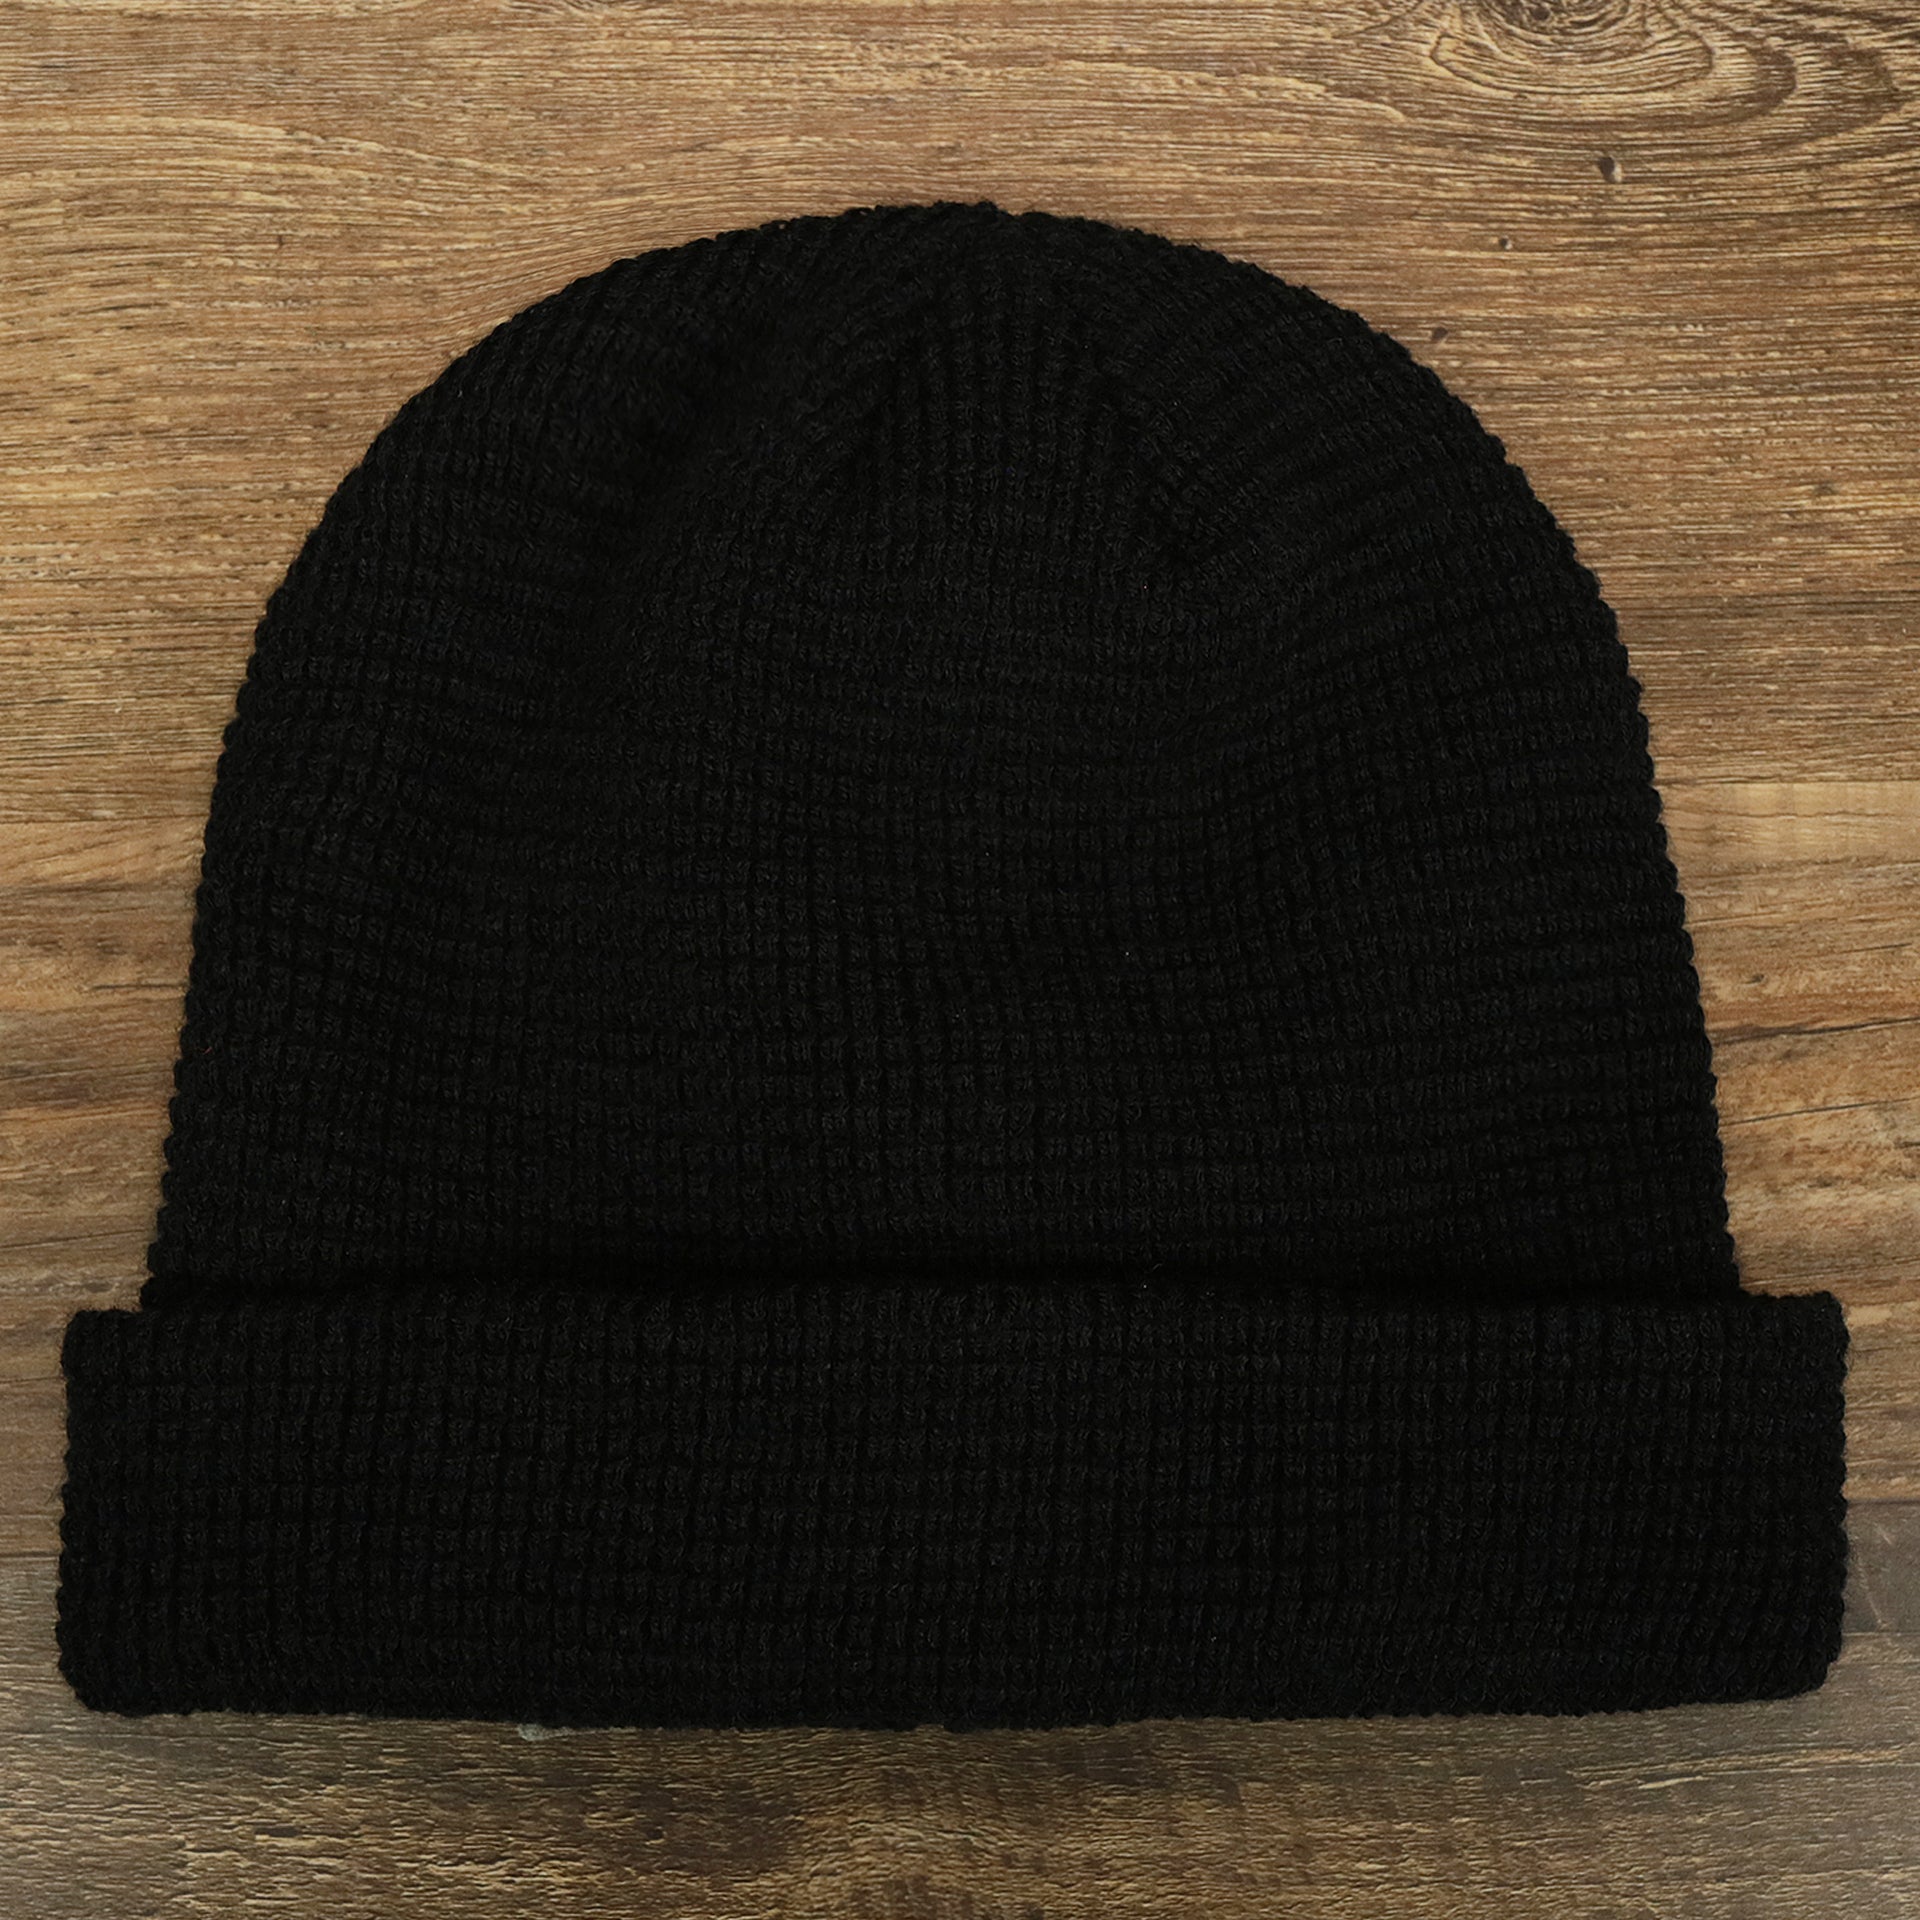 The front of the Black Fisherman Knit Cuffed Beanie